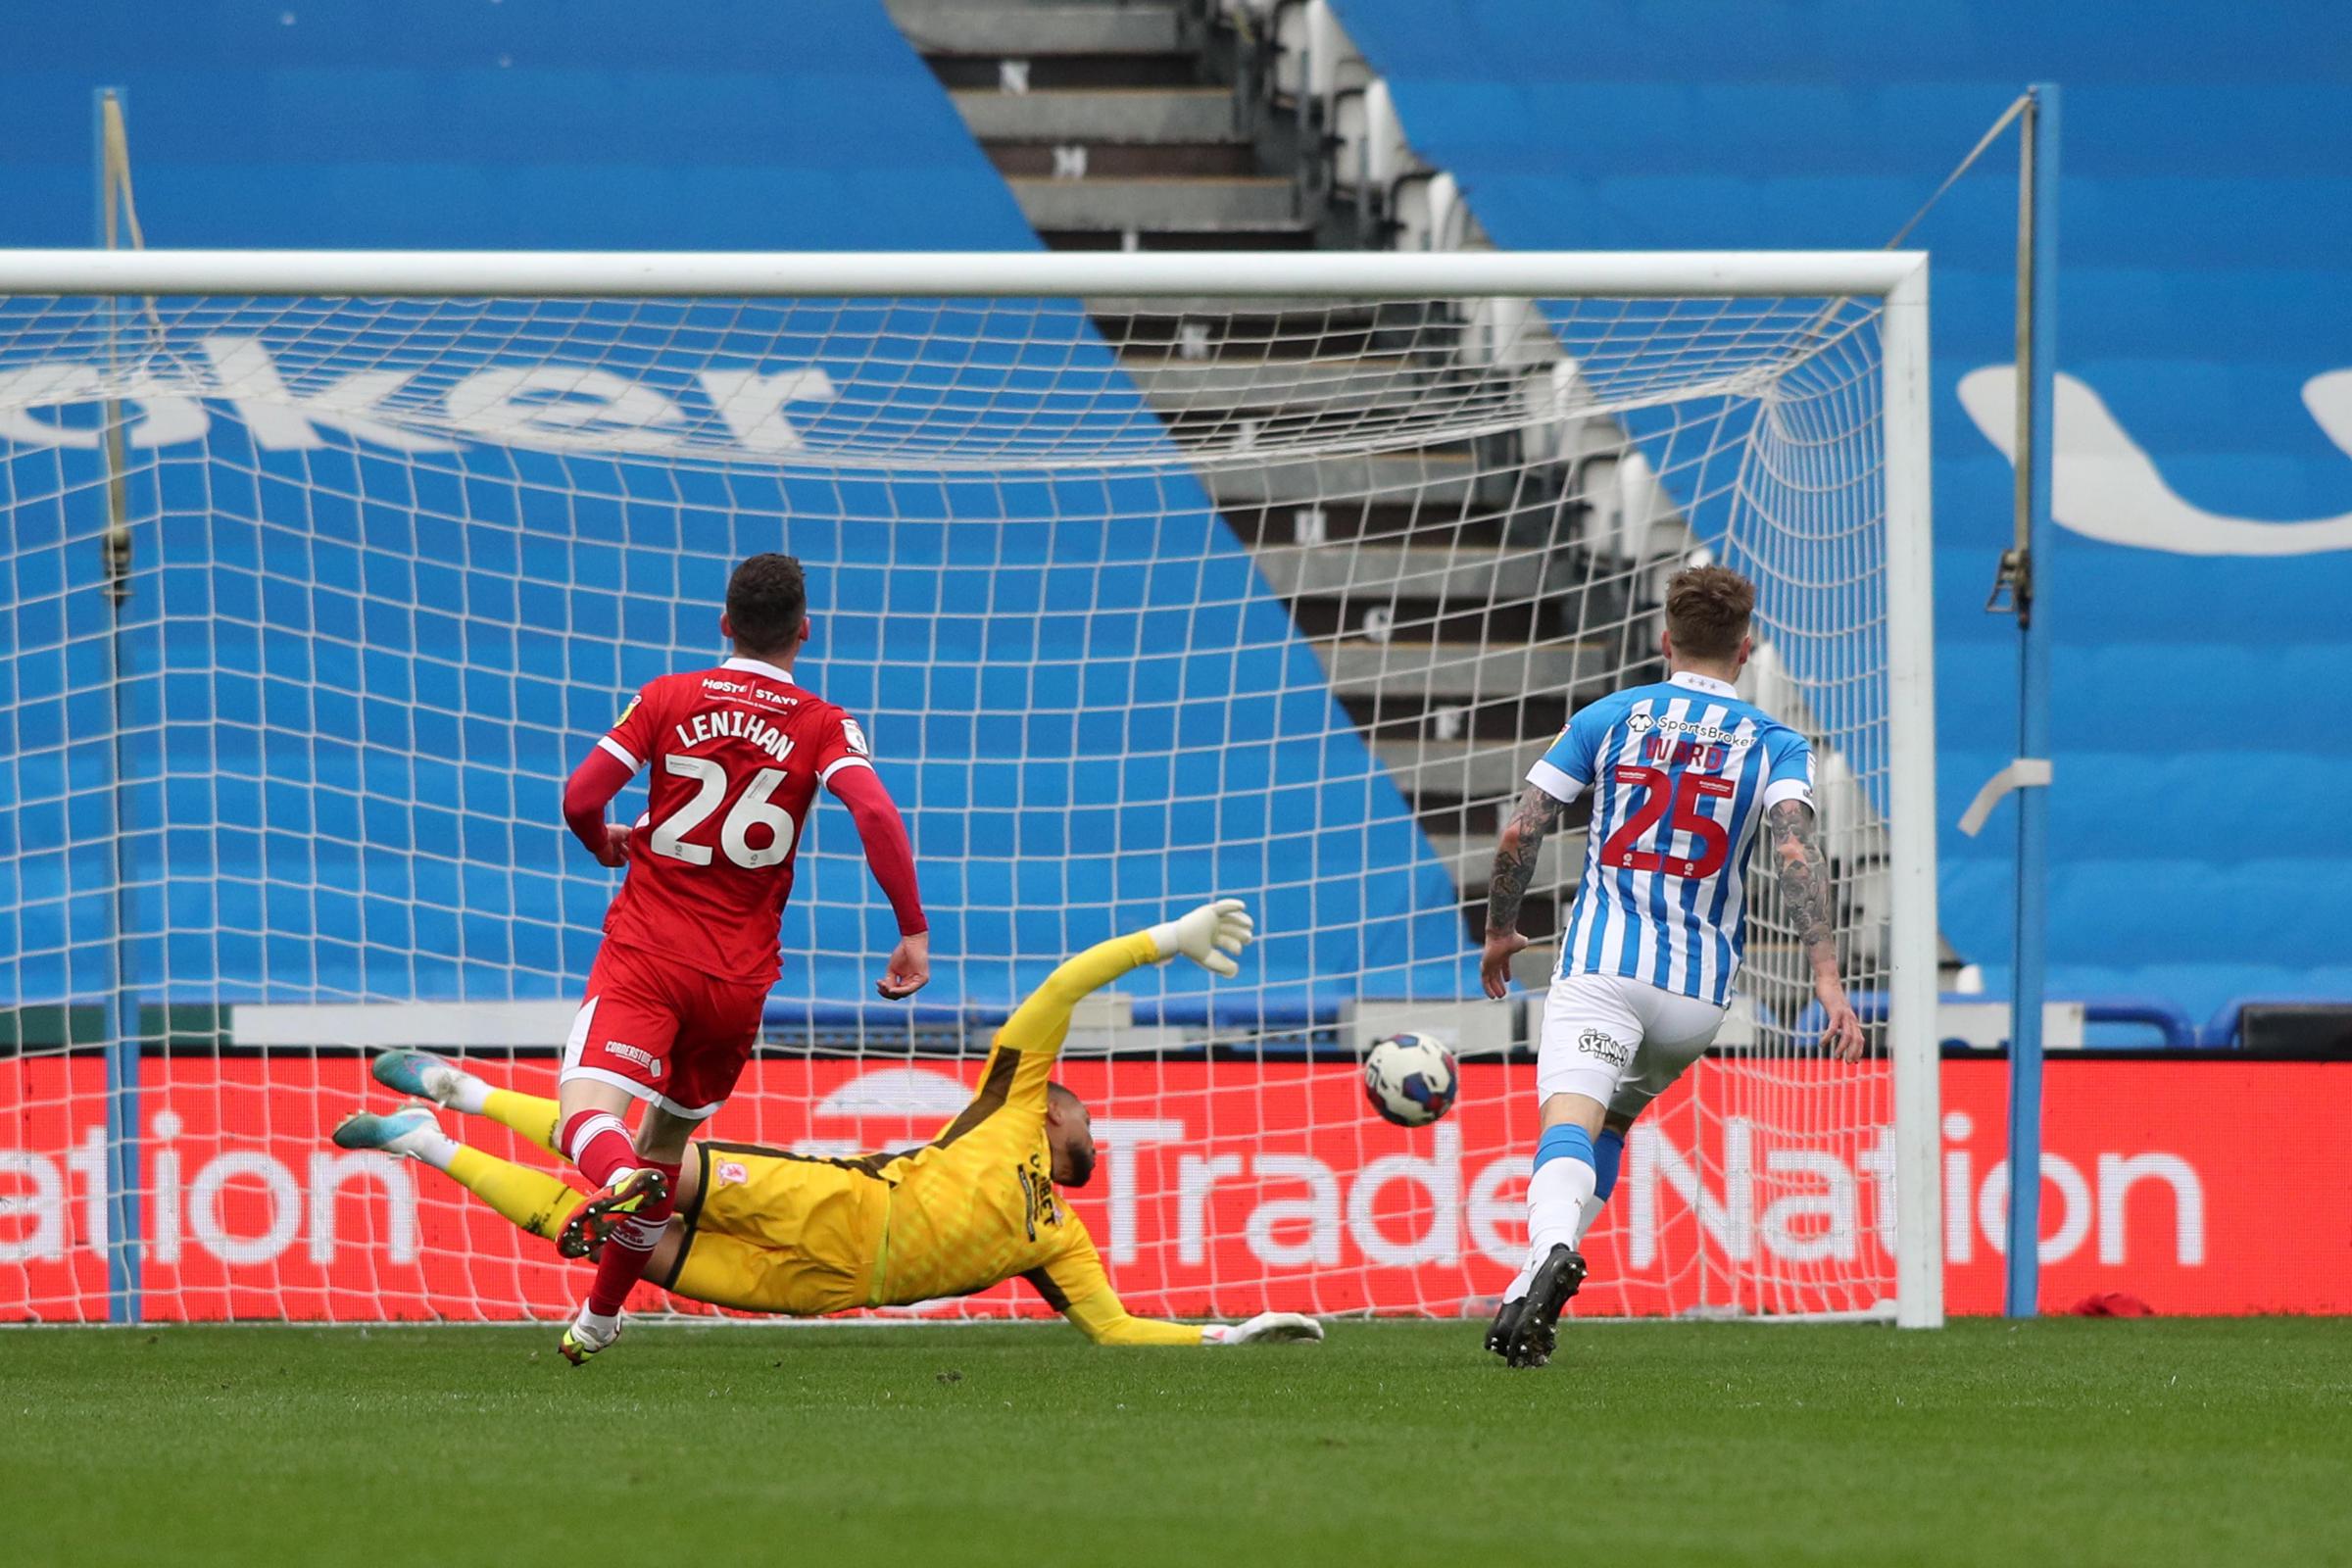 Huddersfield 4-2 Middlesbrough: Boro stunned after horror second half